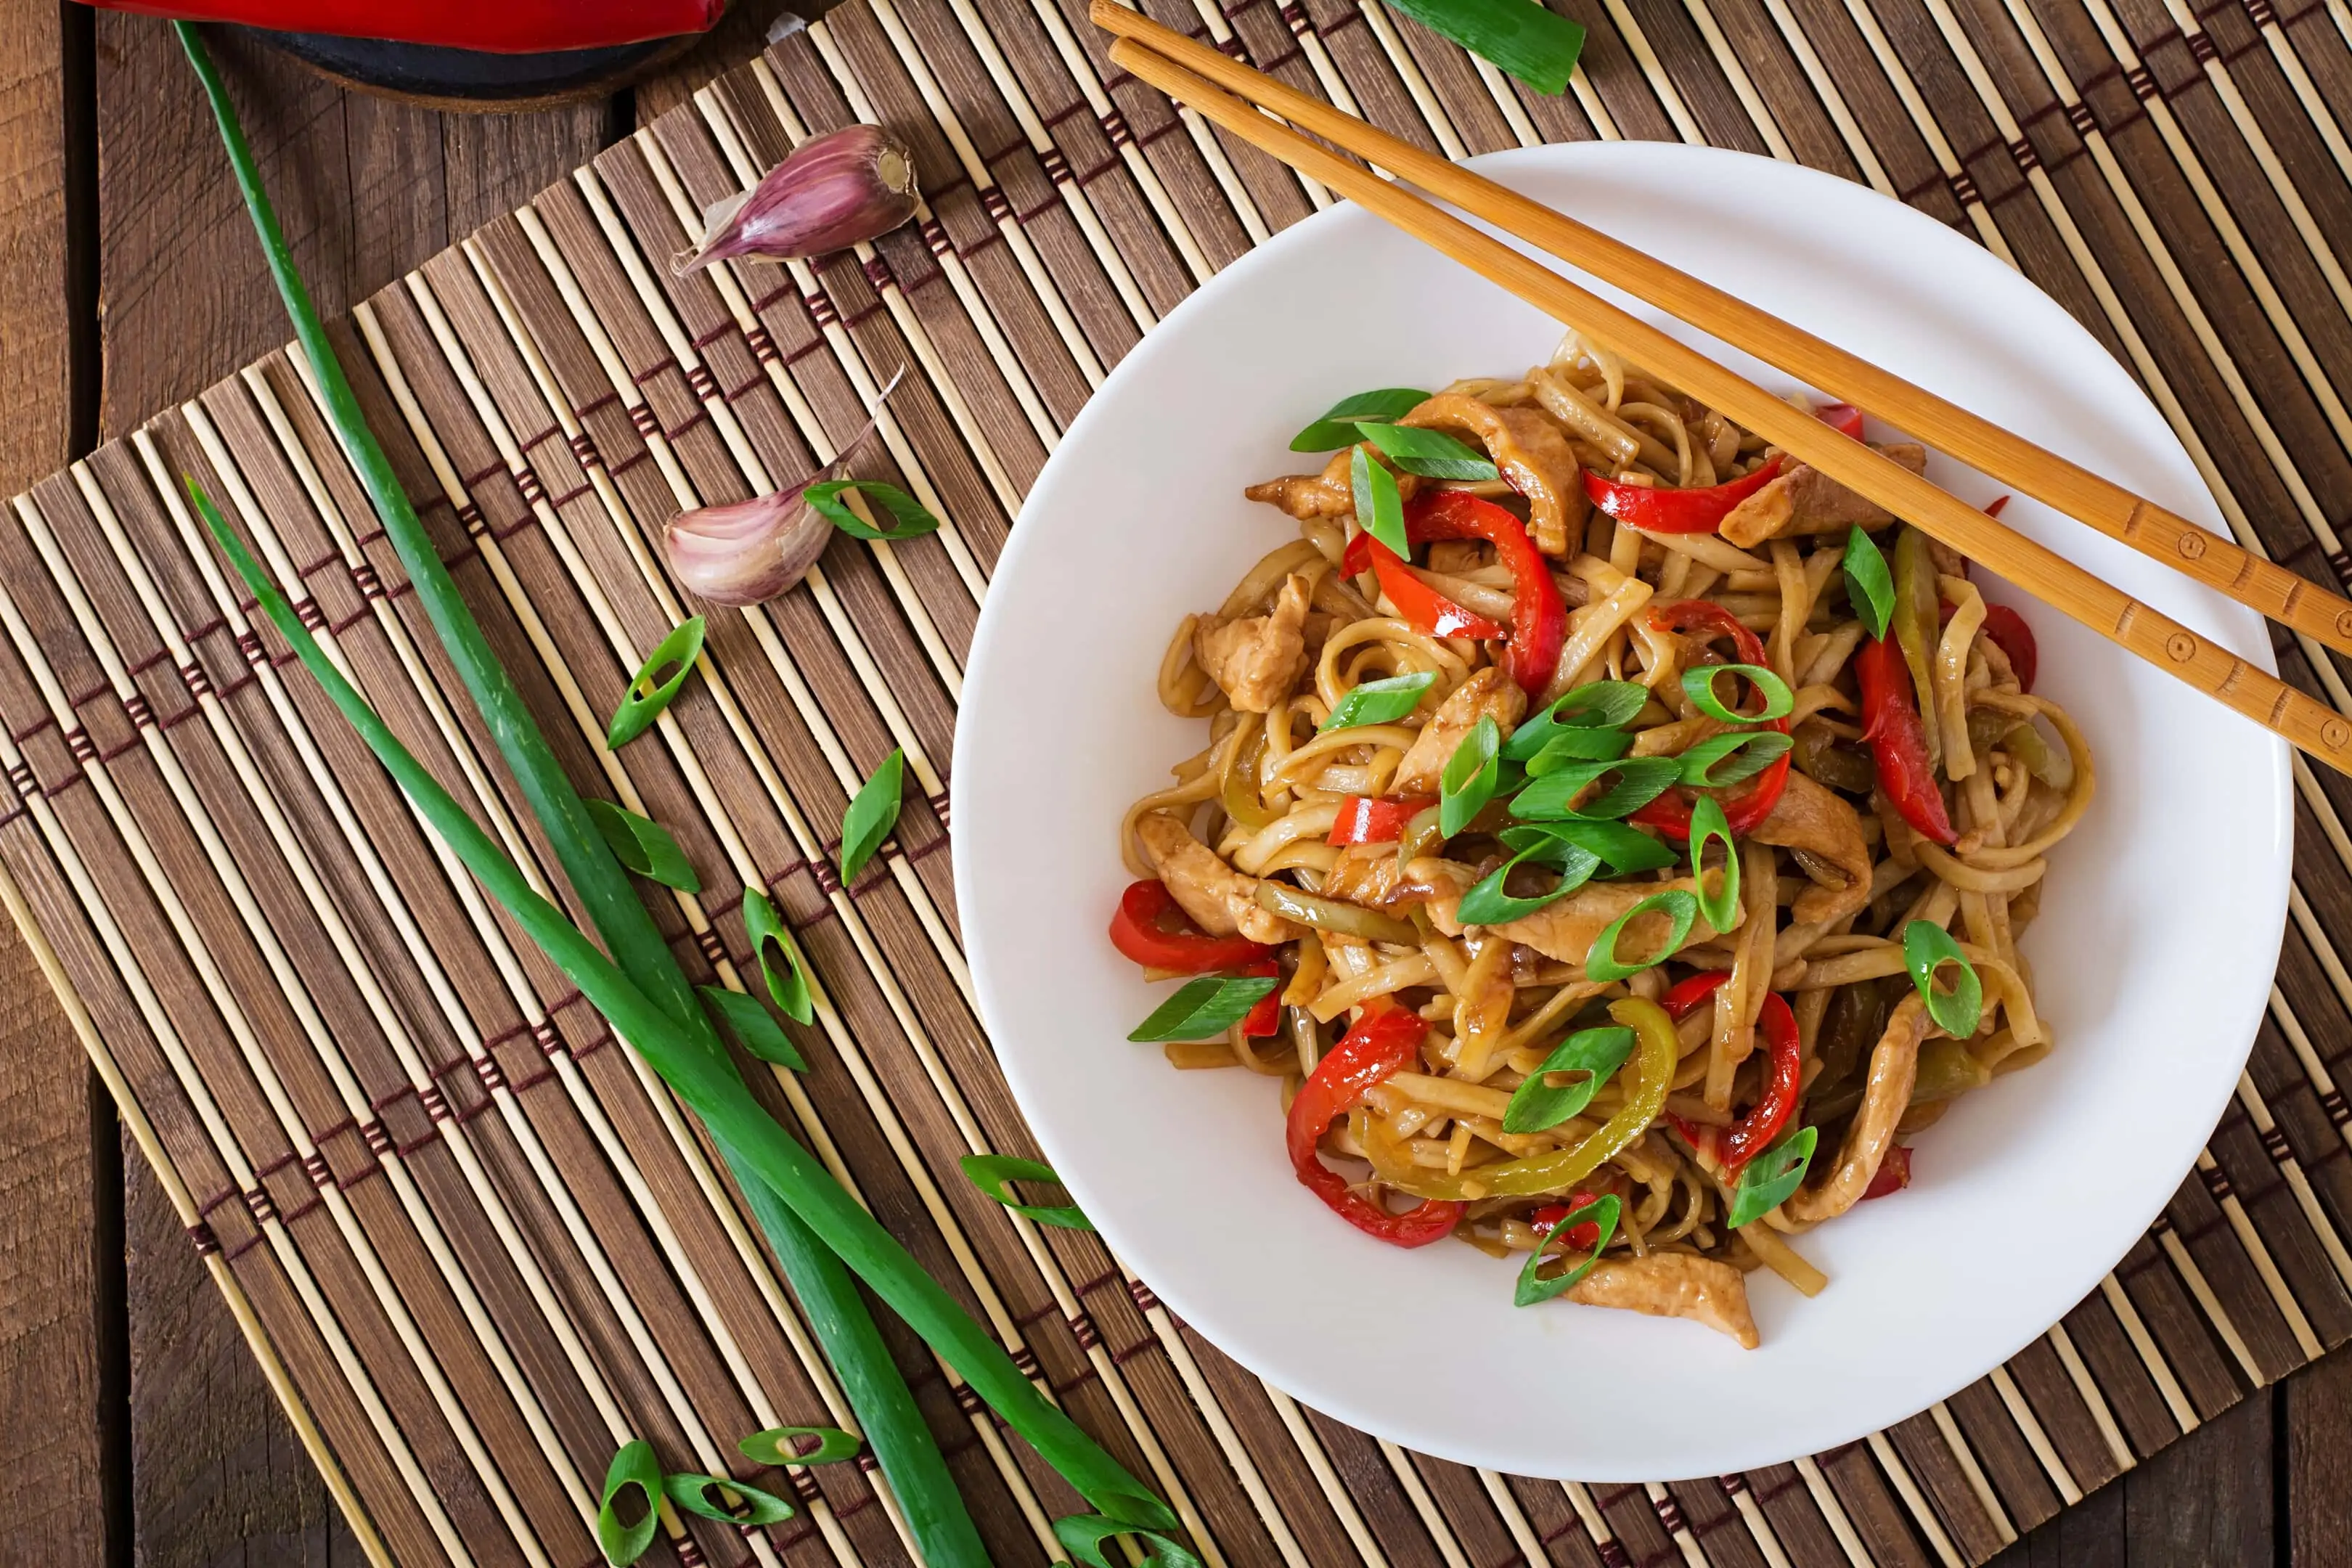 Udon noodles with chicken peppers and seasonings. Udon is one on our list of food that starts with u.